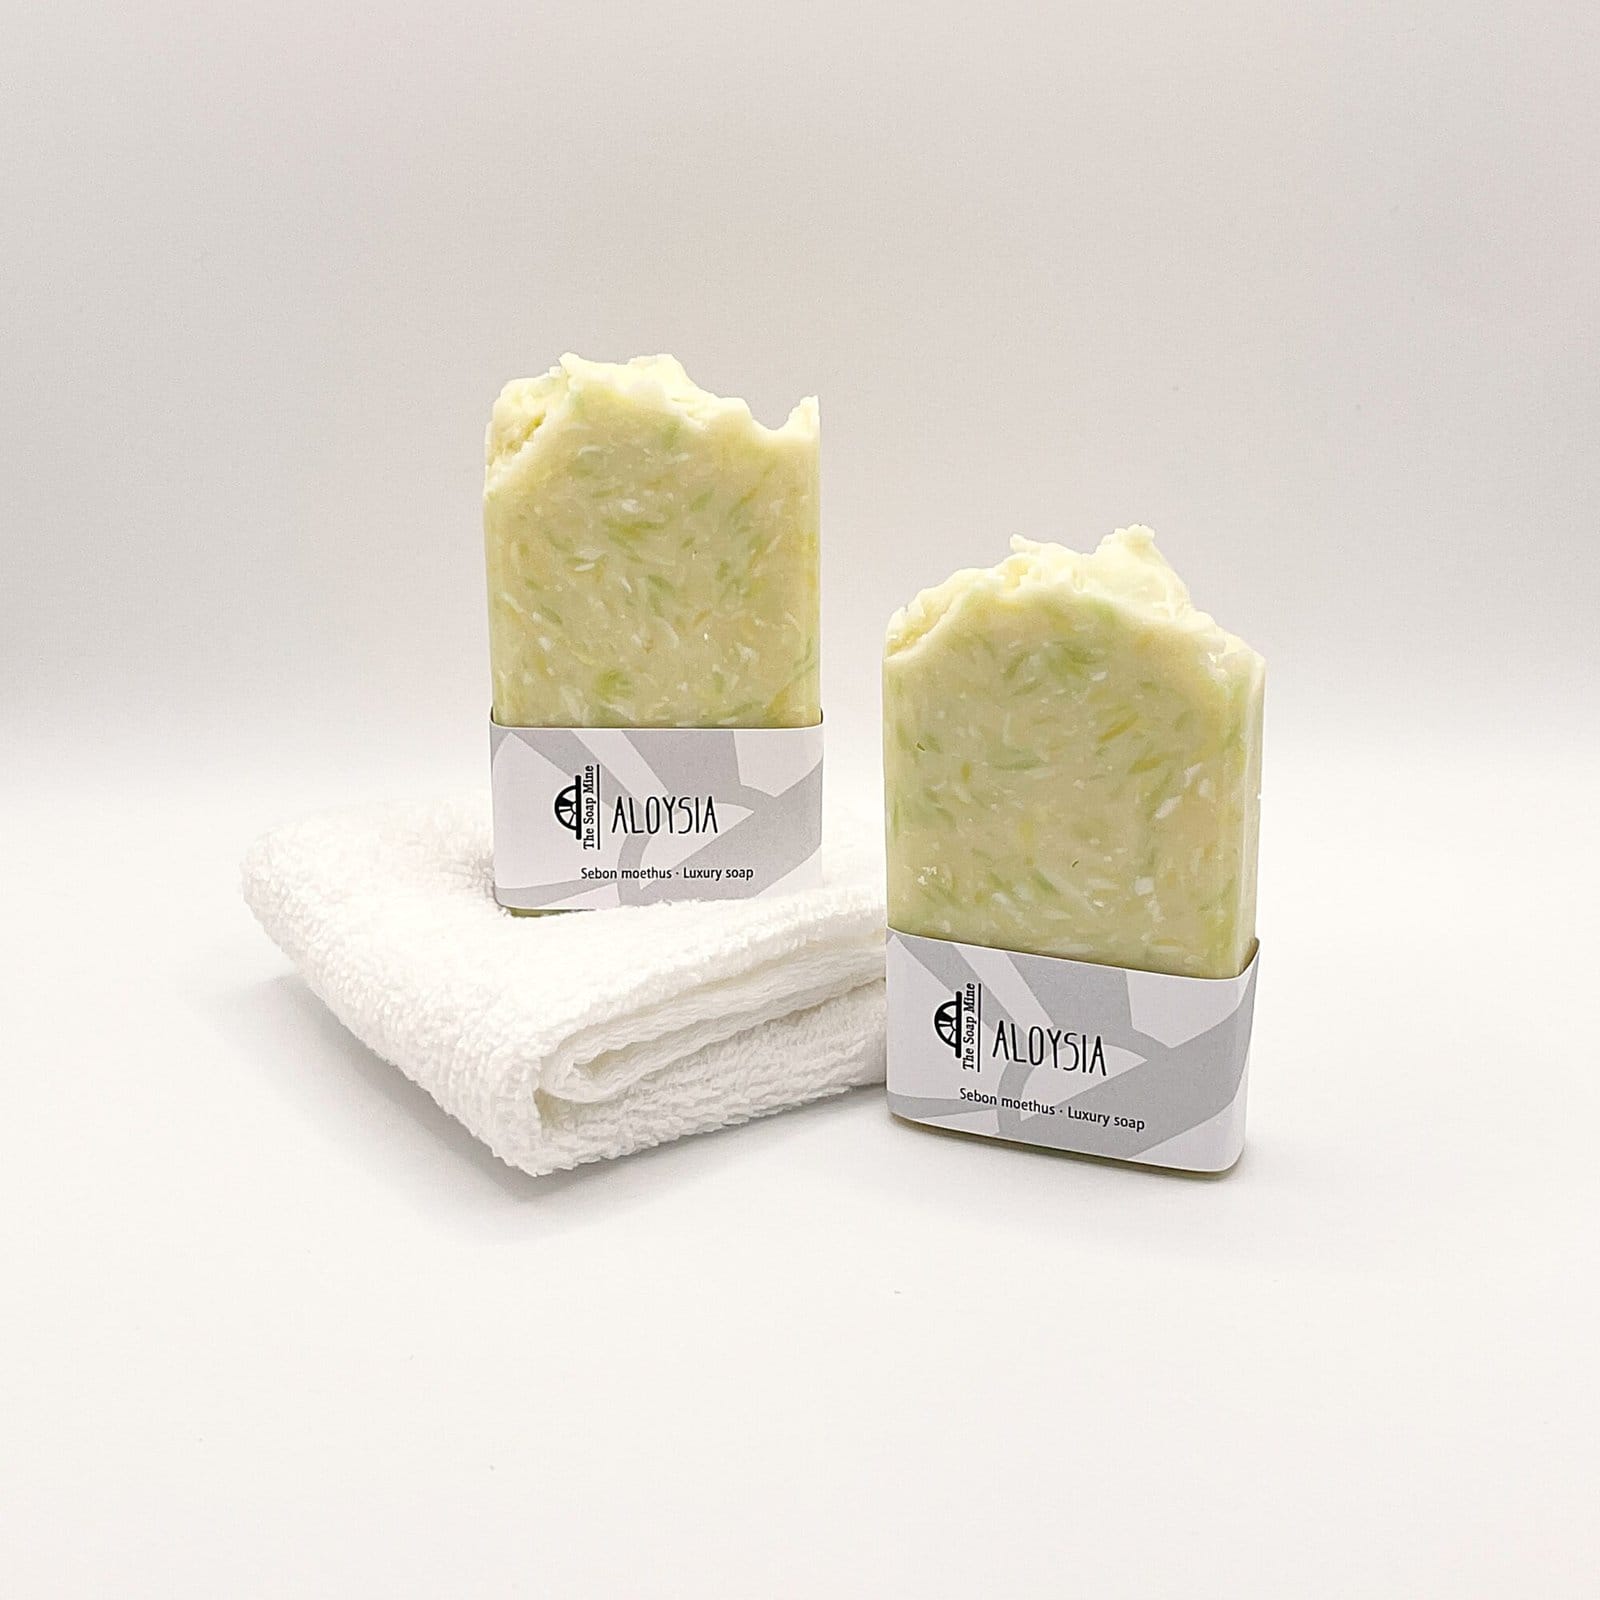 Two bars of white and green Aloysia handmade soap and a white facecloth